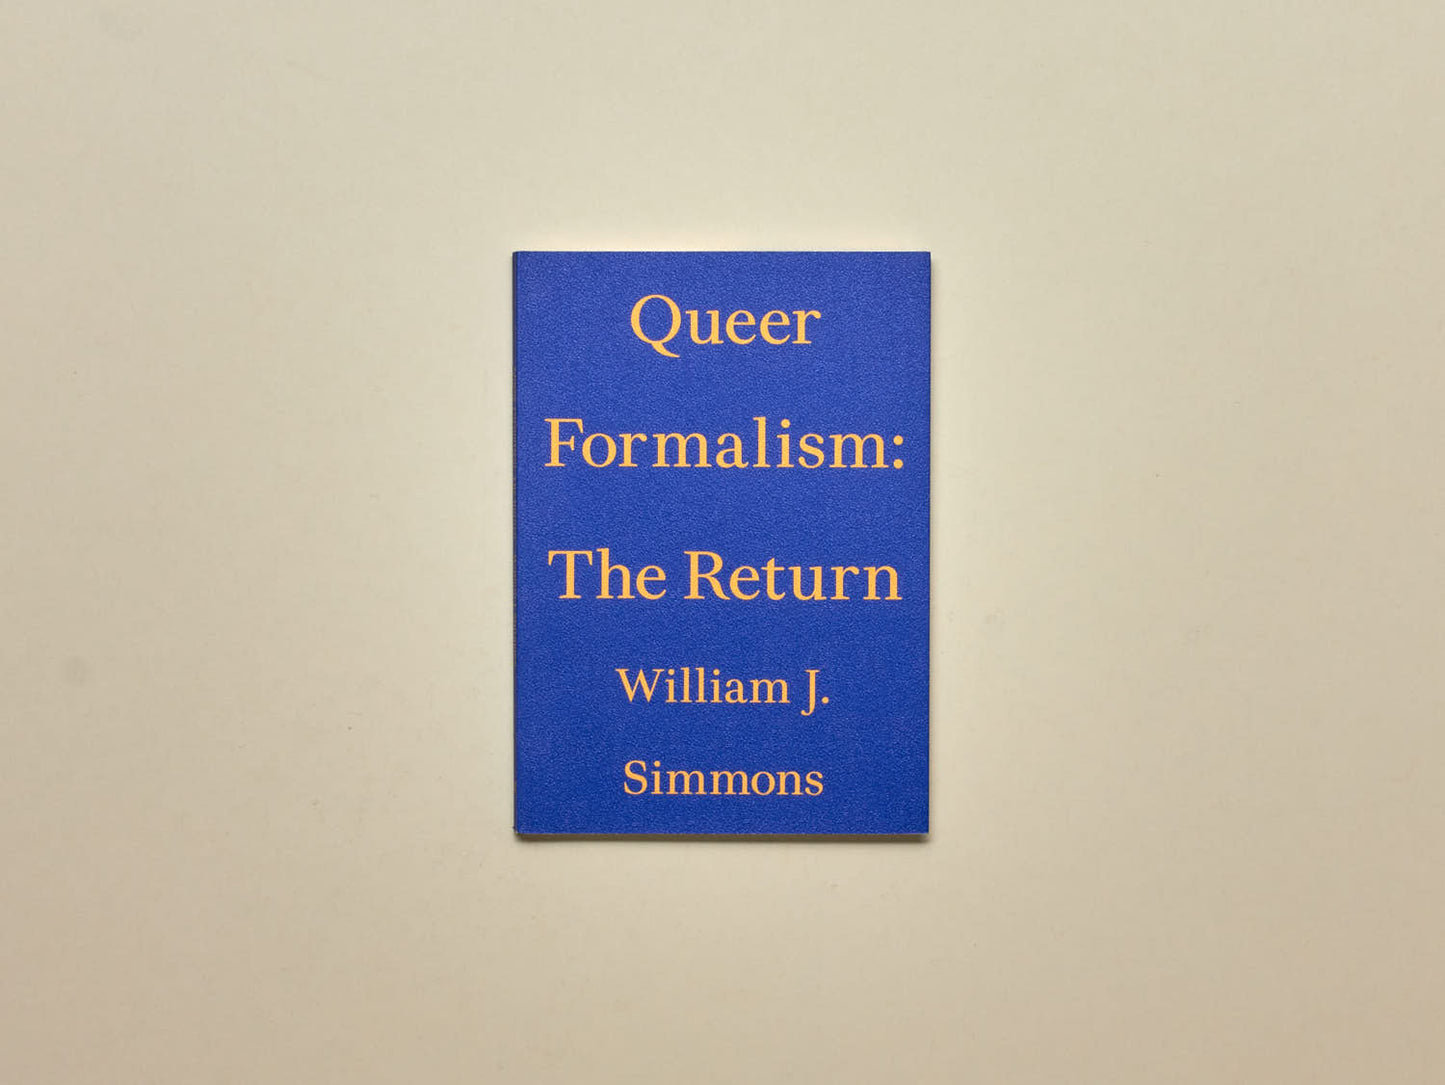 William J. Simmons, Queer Formalism: The Return